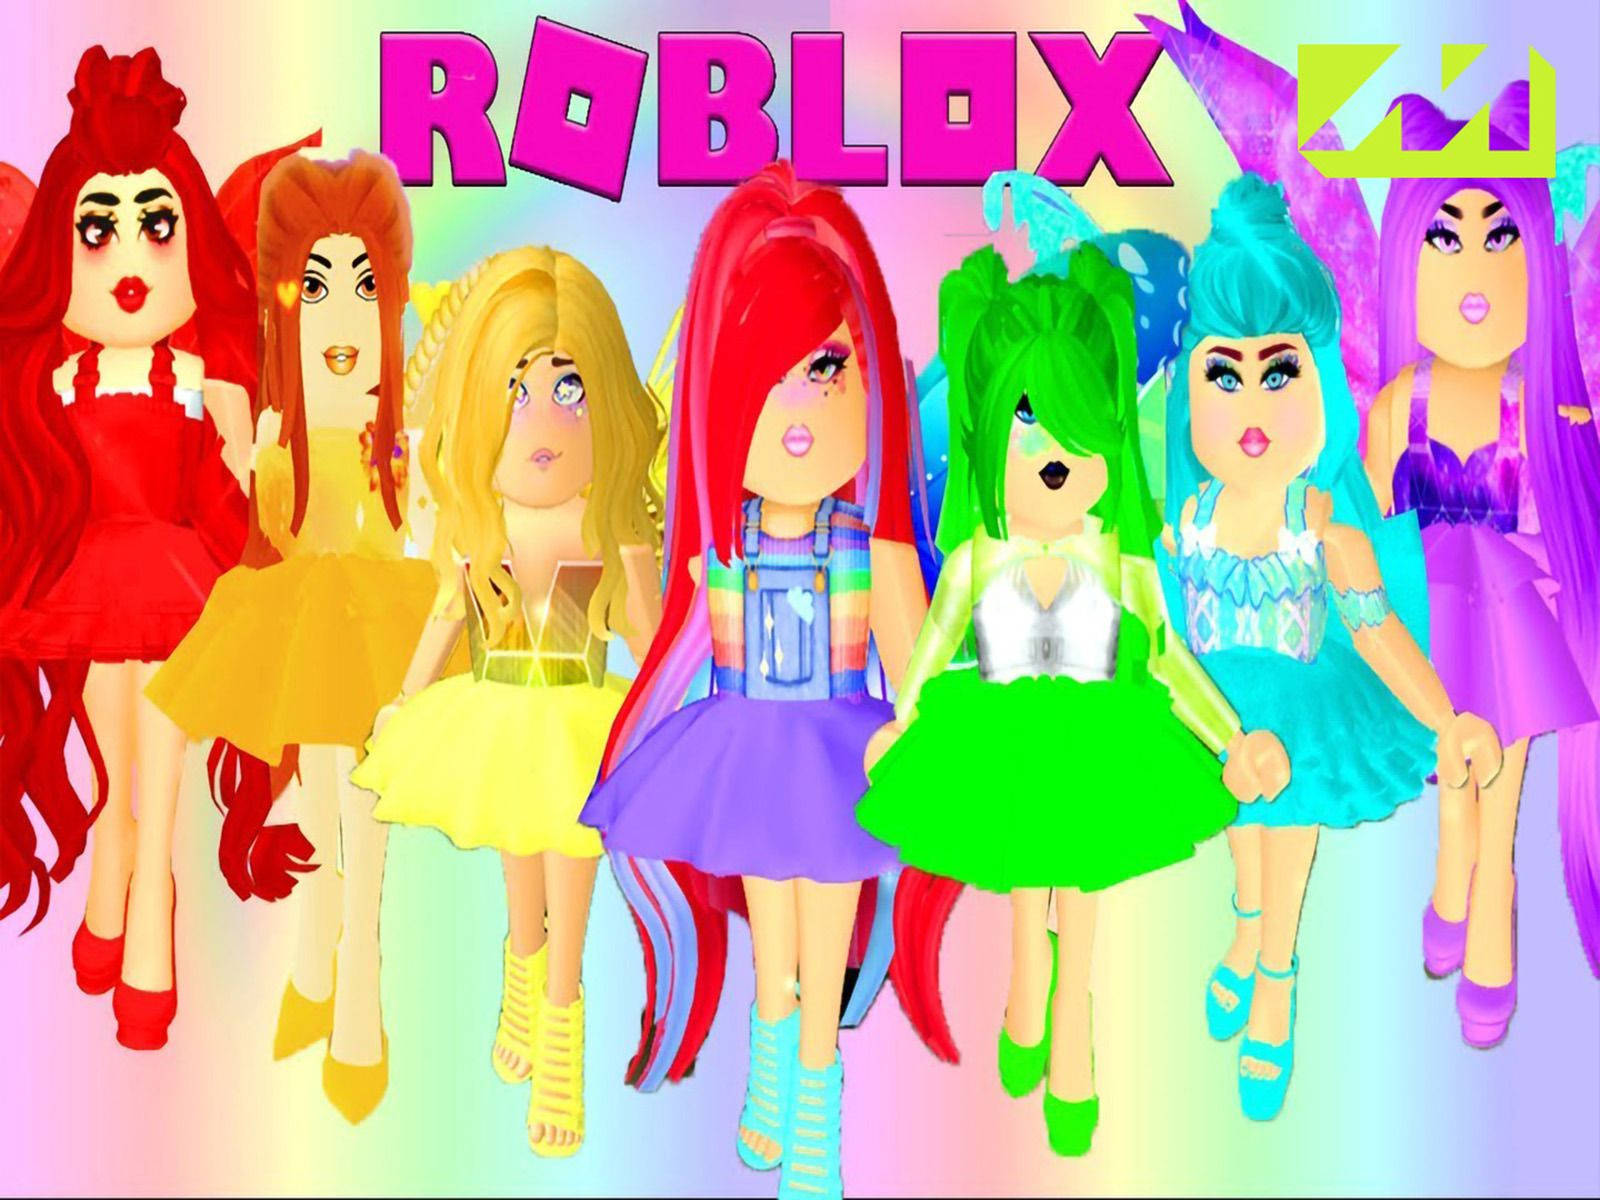 100+] Girl Roblox Character Wallpapers